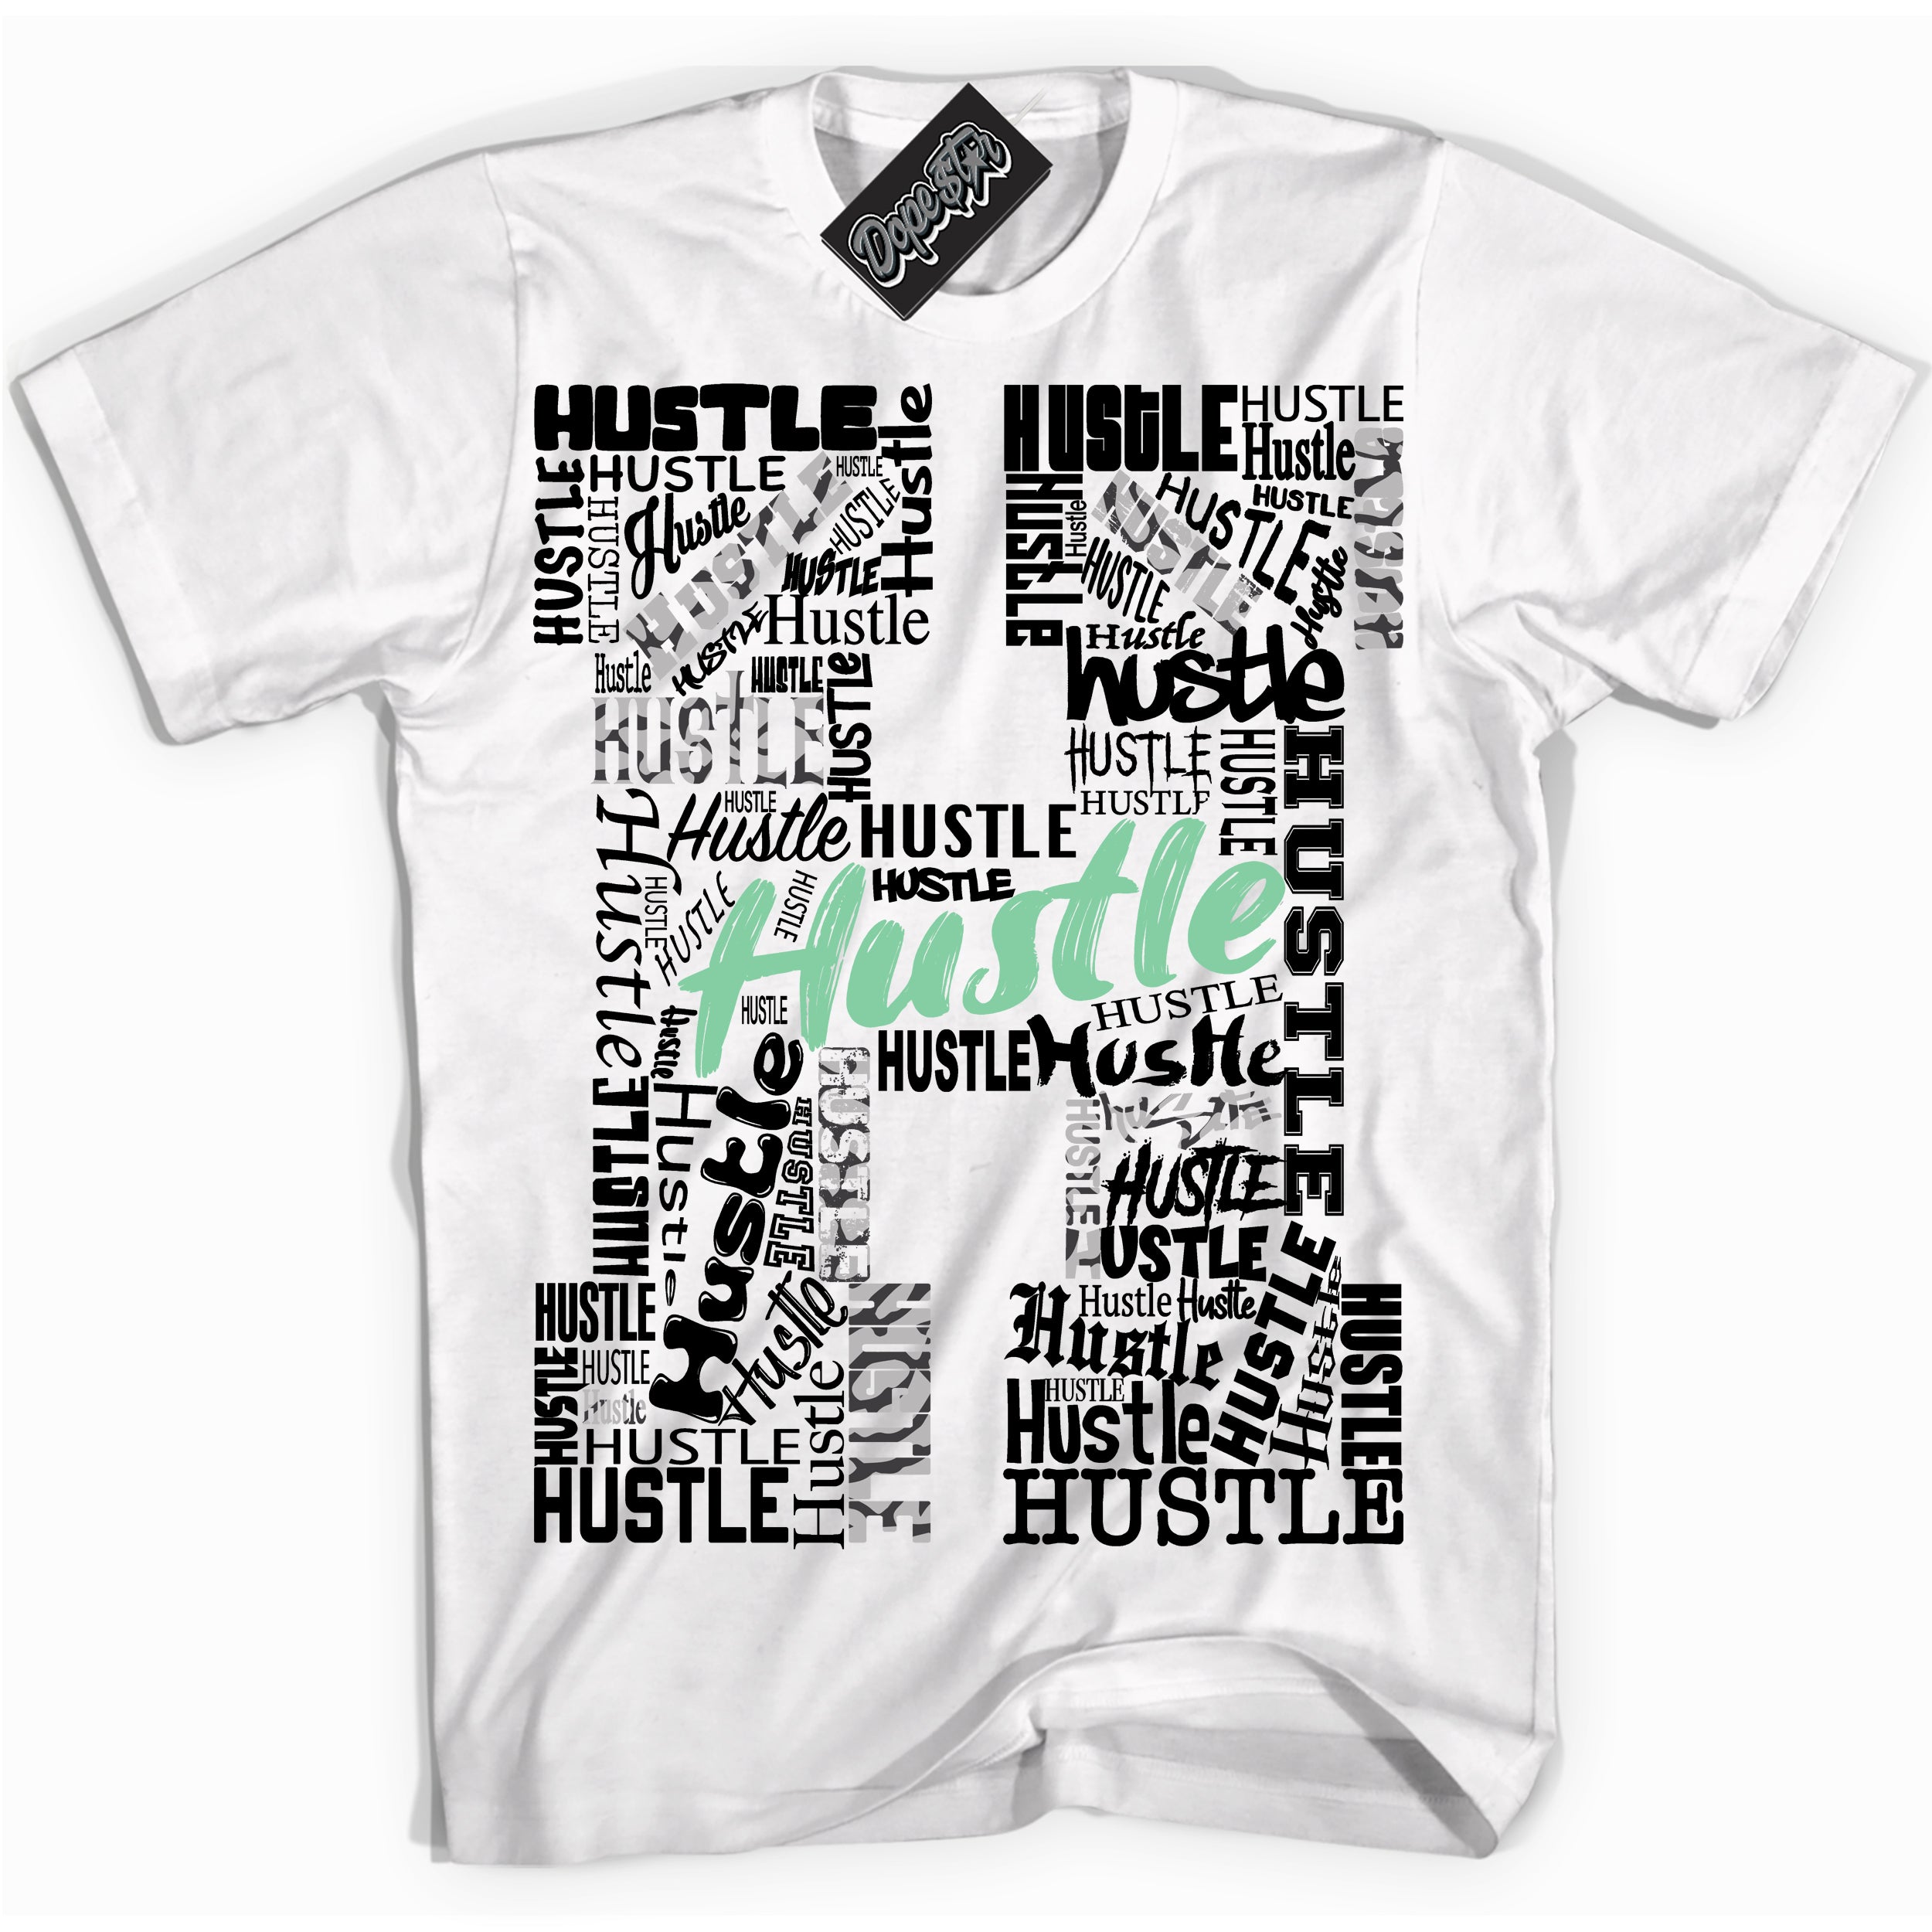 Cool White graphic tee with “ Hustle ” design, that perfectly matches Green Glow 3s sneakers 